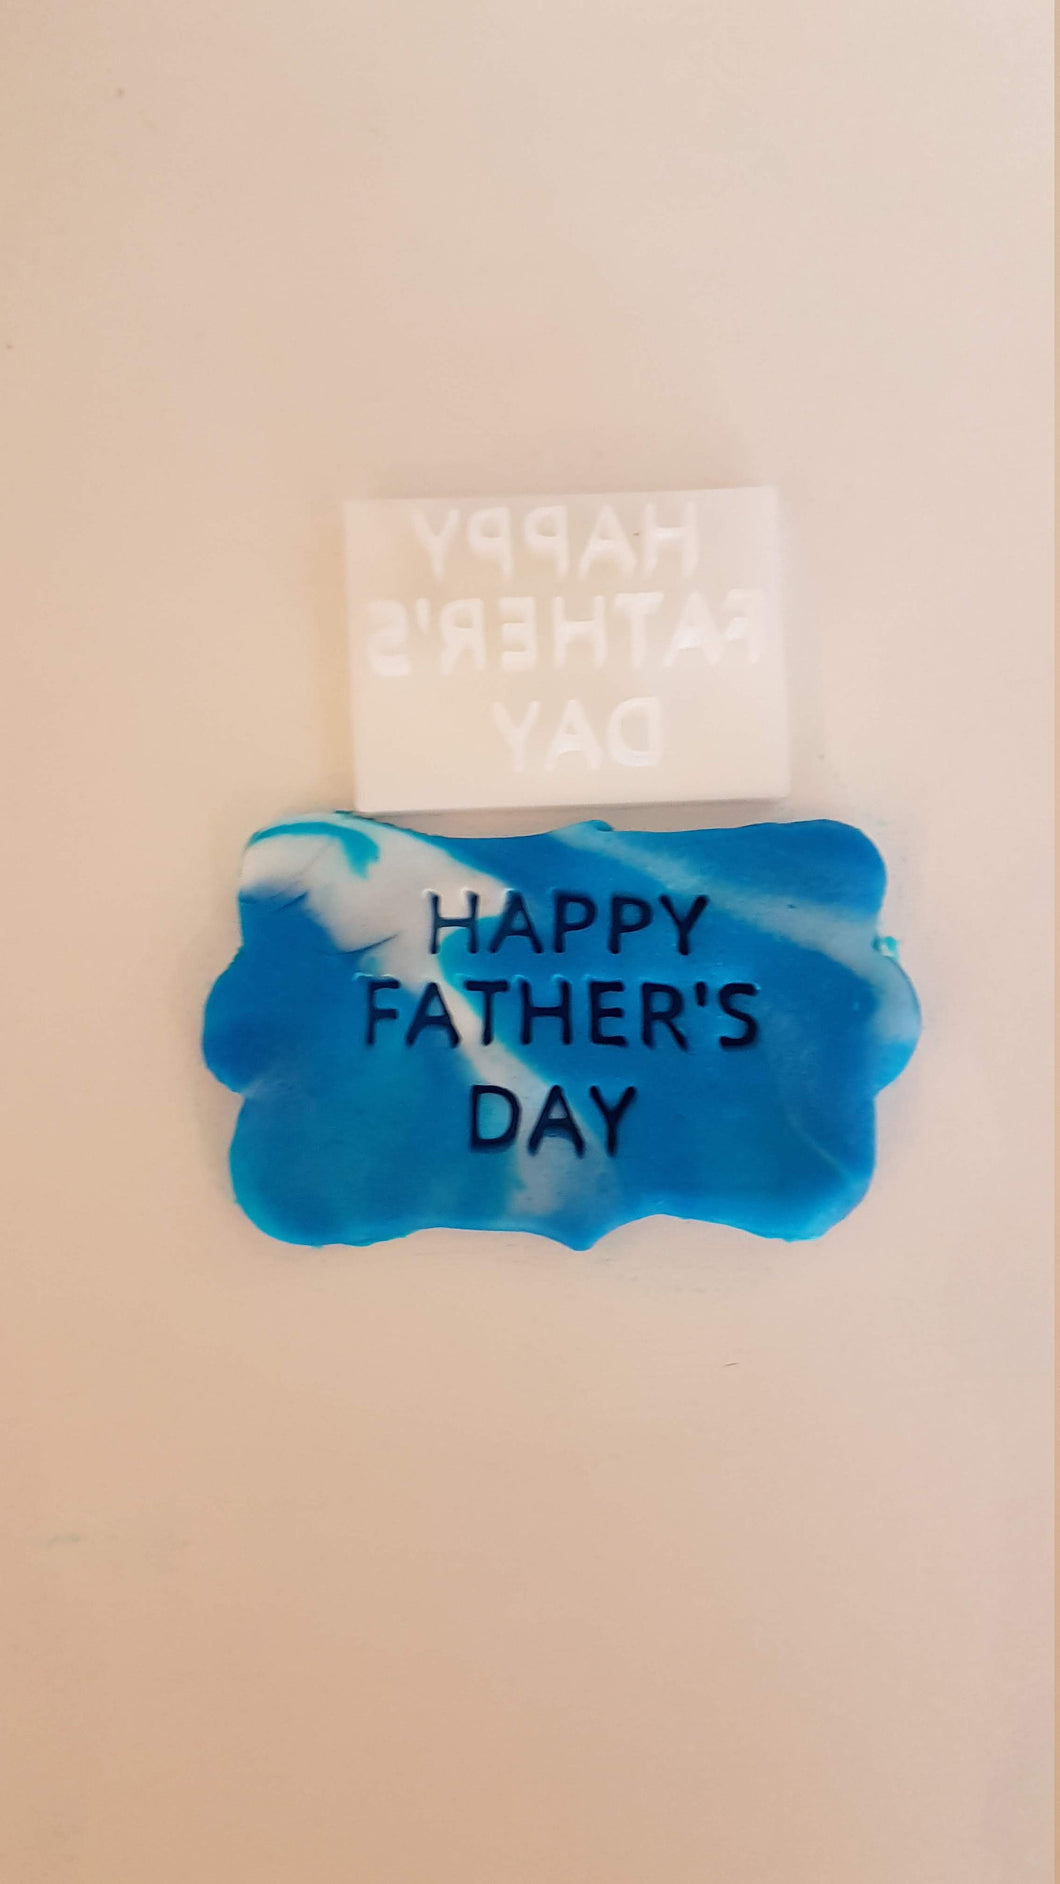 Happy Father's Day Stamp|Icing|Baking|Cookie Stamp|Father's Day Gift|Birthday|Husband|Partner|Daddy|Dad